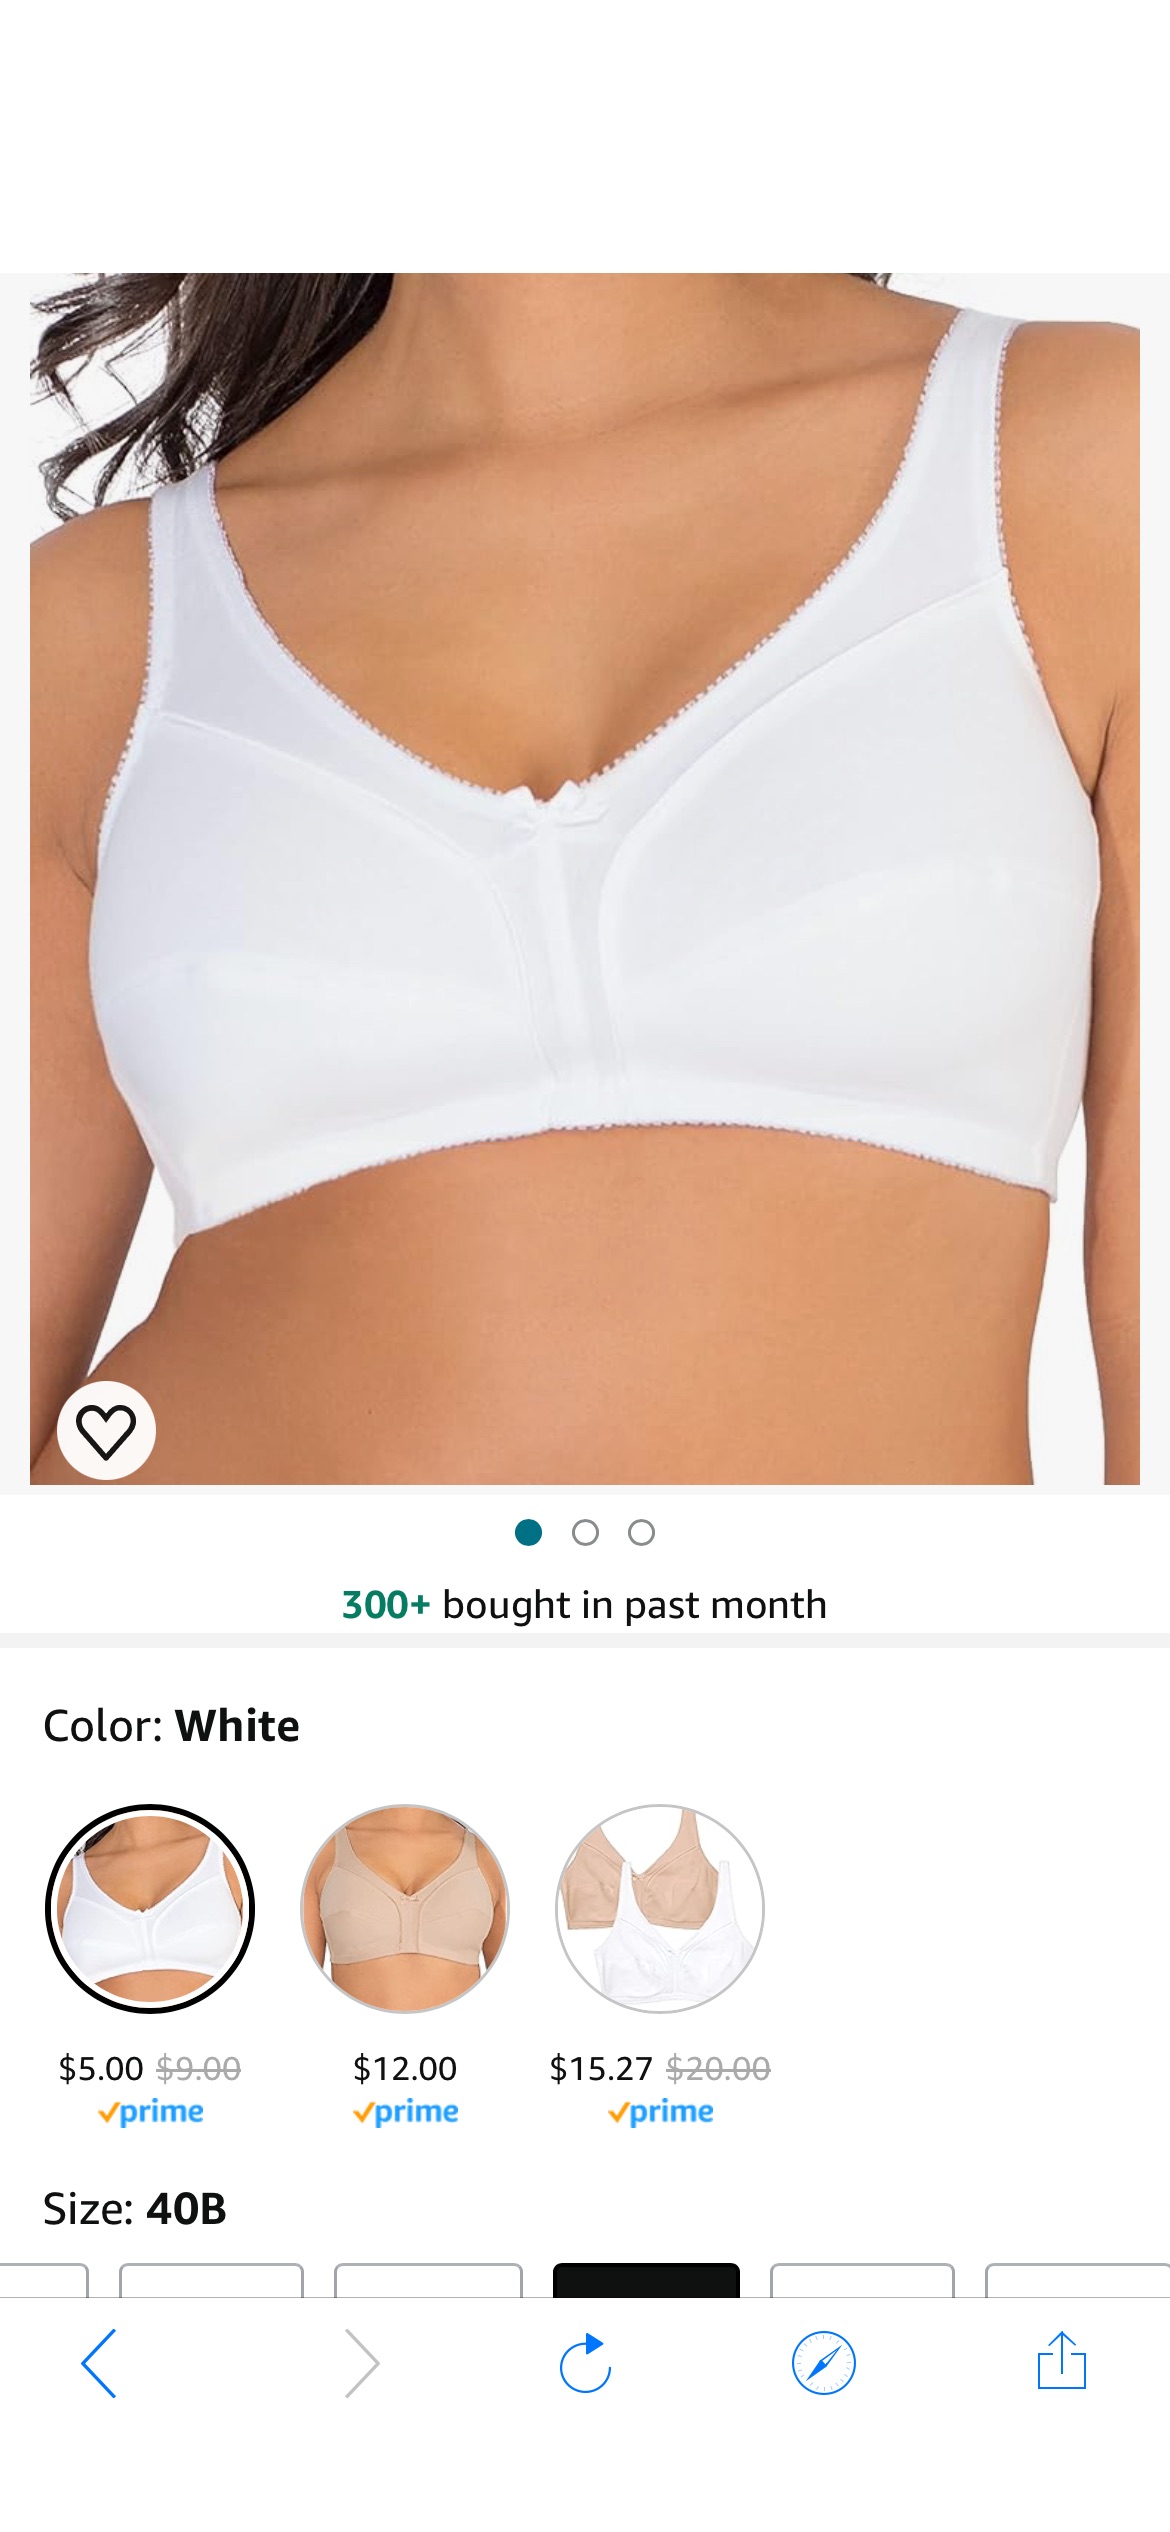 Fruit of the Loom womens Seamed Soft Cup Wirefree Cotton Bra, White Shine, 44D at Amazon Women’s Clothing store